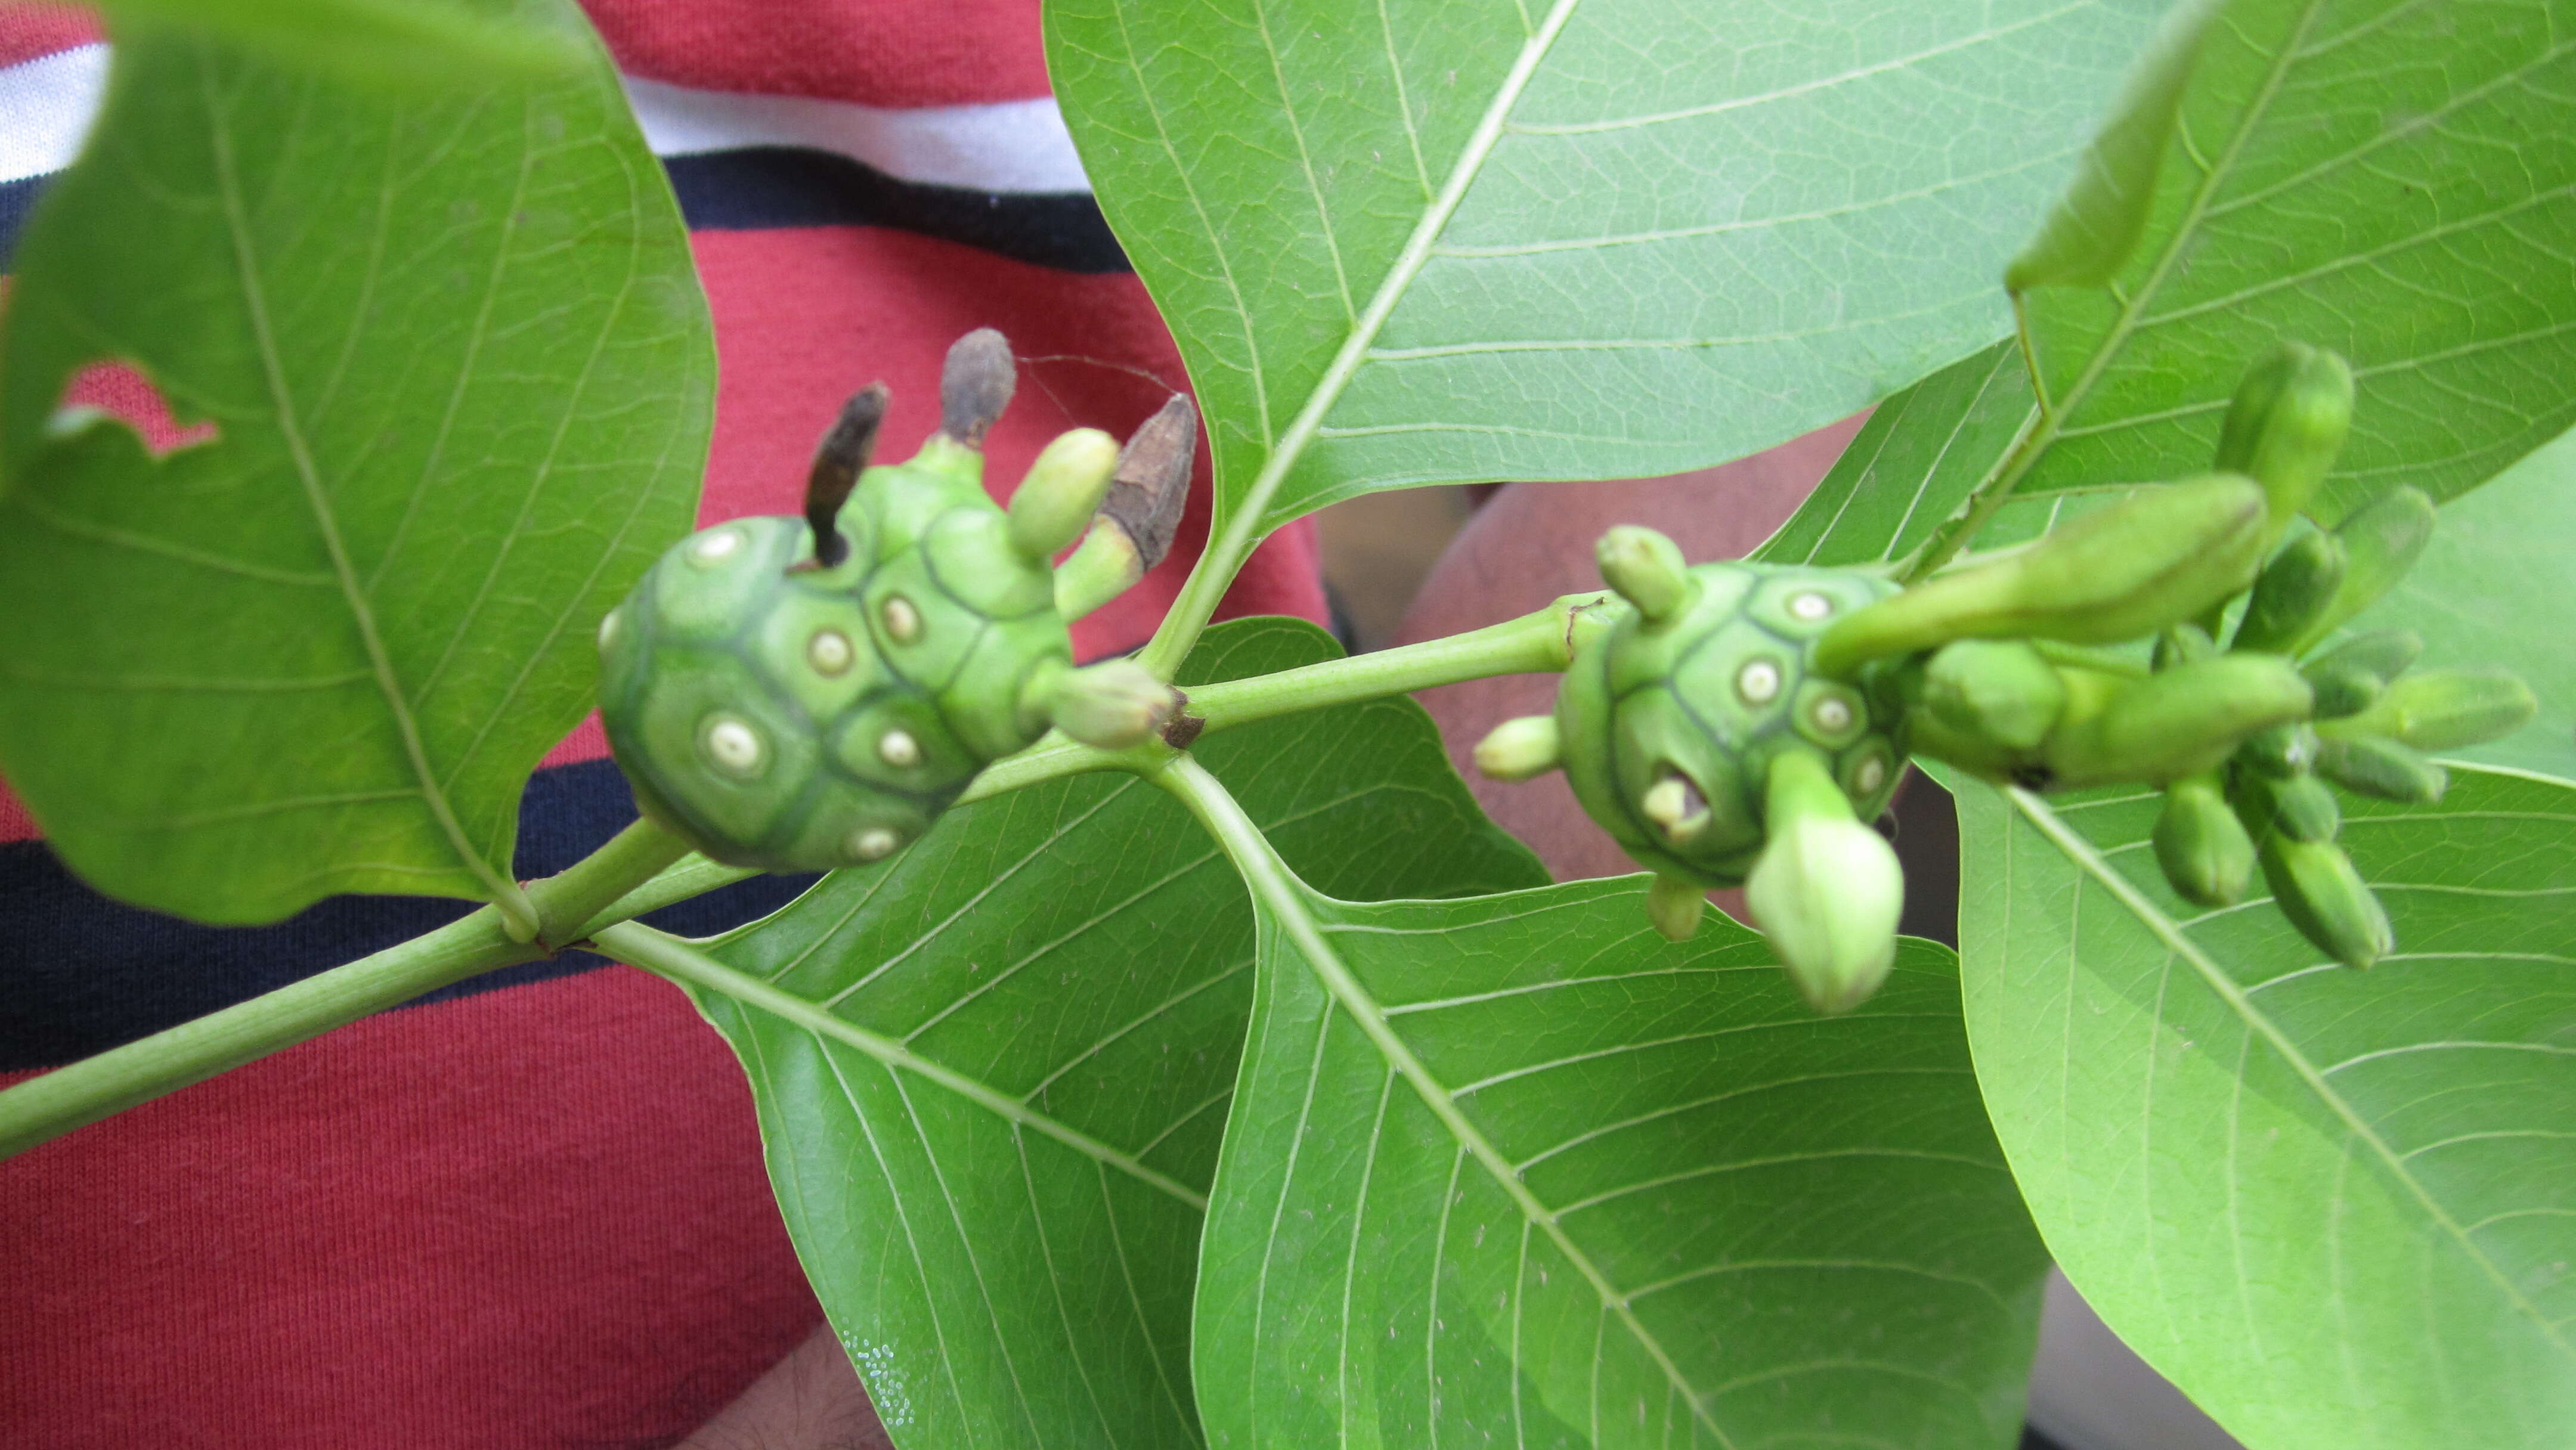 Image of Indian mulberry